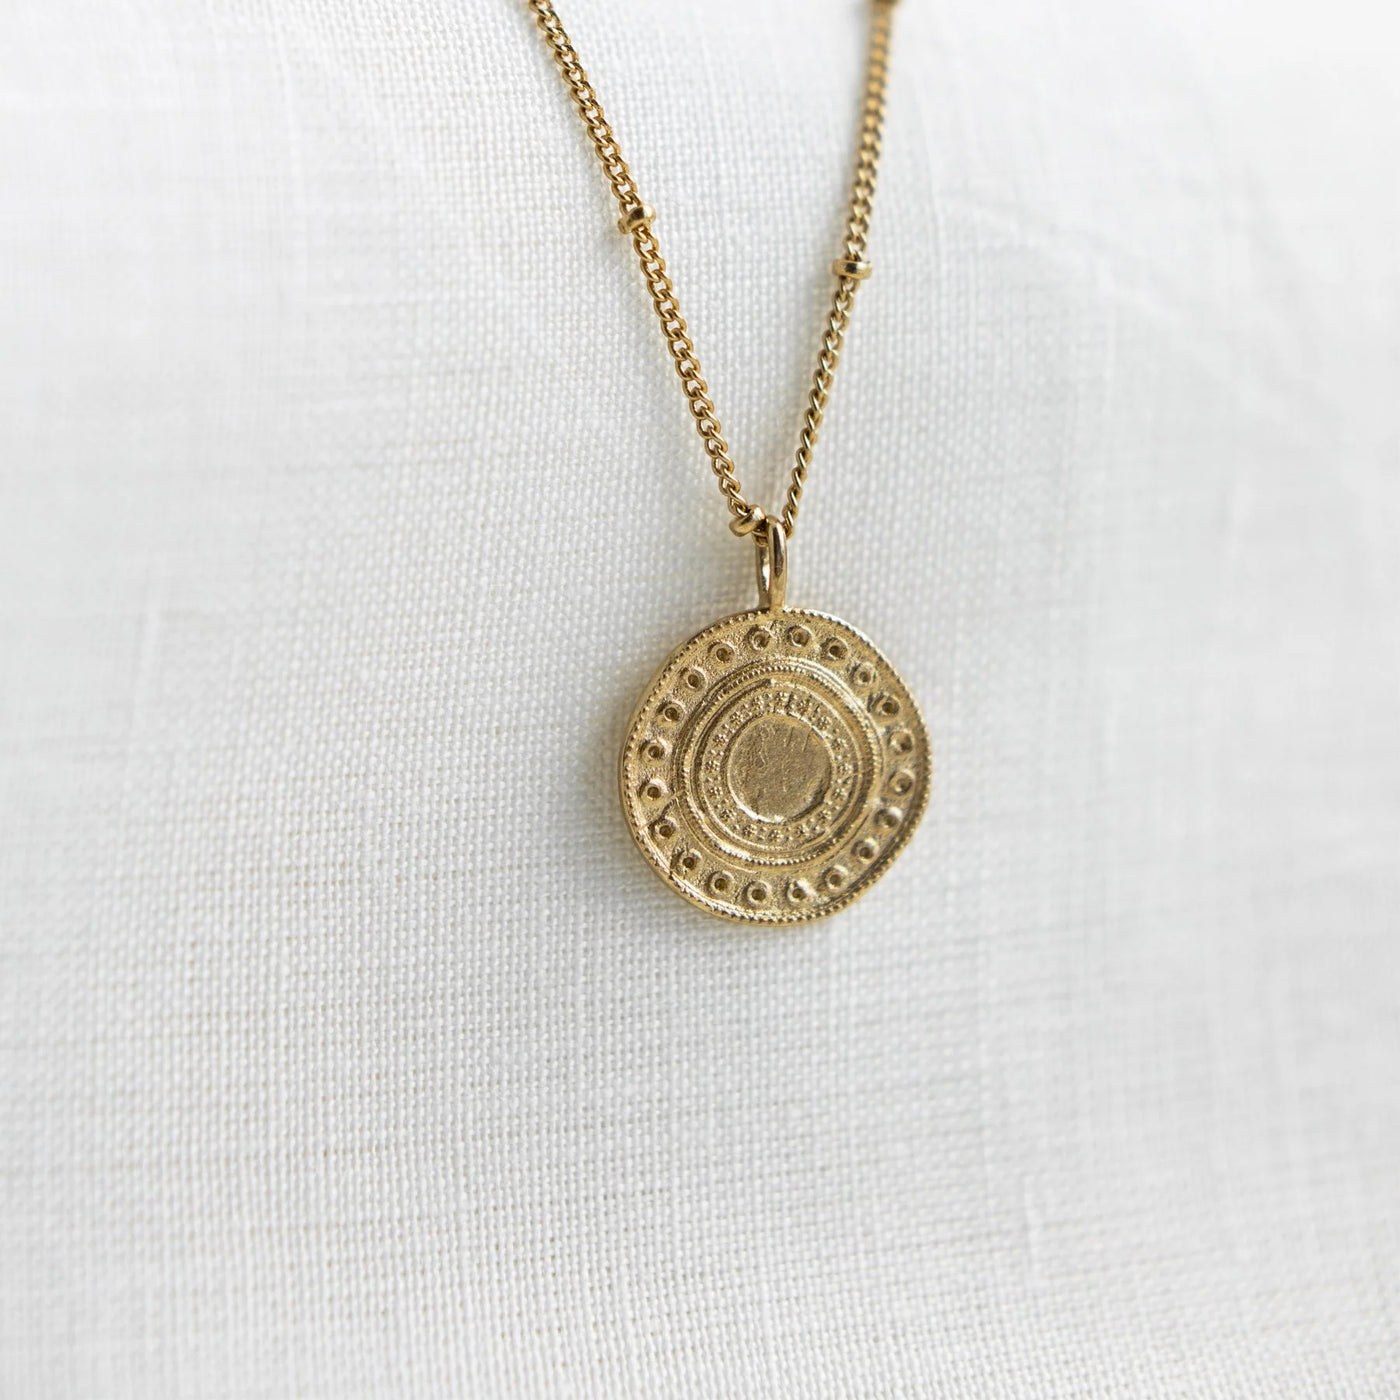 A close up of the Alba Necklace by Agape Studio. The necklace is a round gold pendant on a fine gold chain.